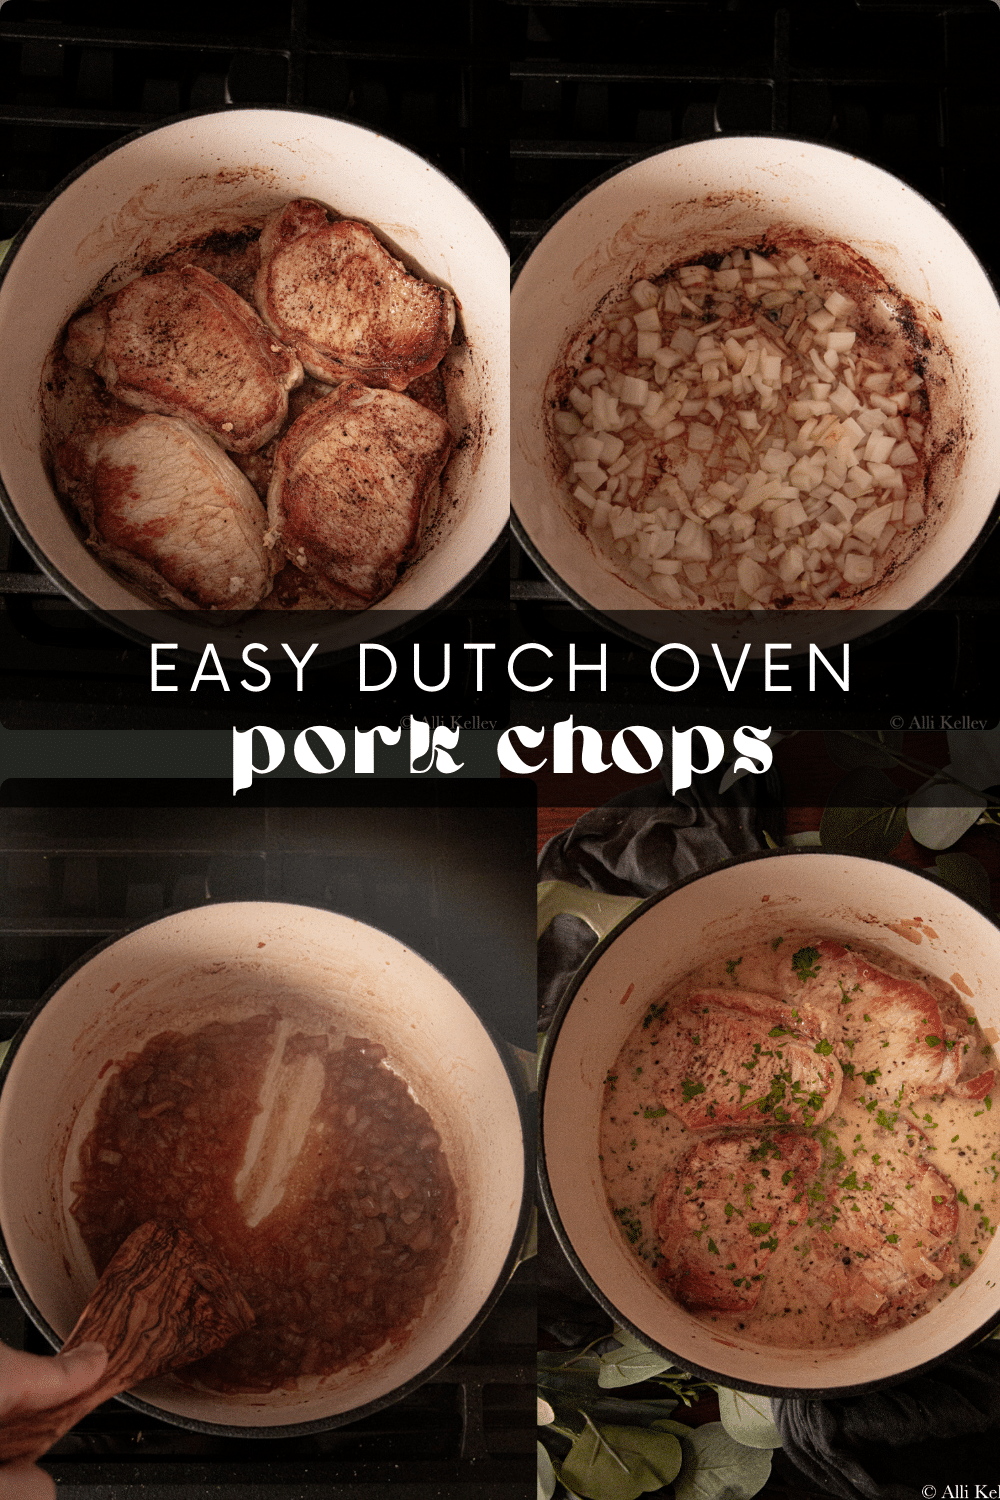 Dutch oven pork chops are a family favorite and make the best weeknight dinner! A creamy white wine sauce coats tender, juicy pork chops for a dish that’s delicious and easy to make. The honey and mustard are the secret to creating a perfect balance of flavors!